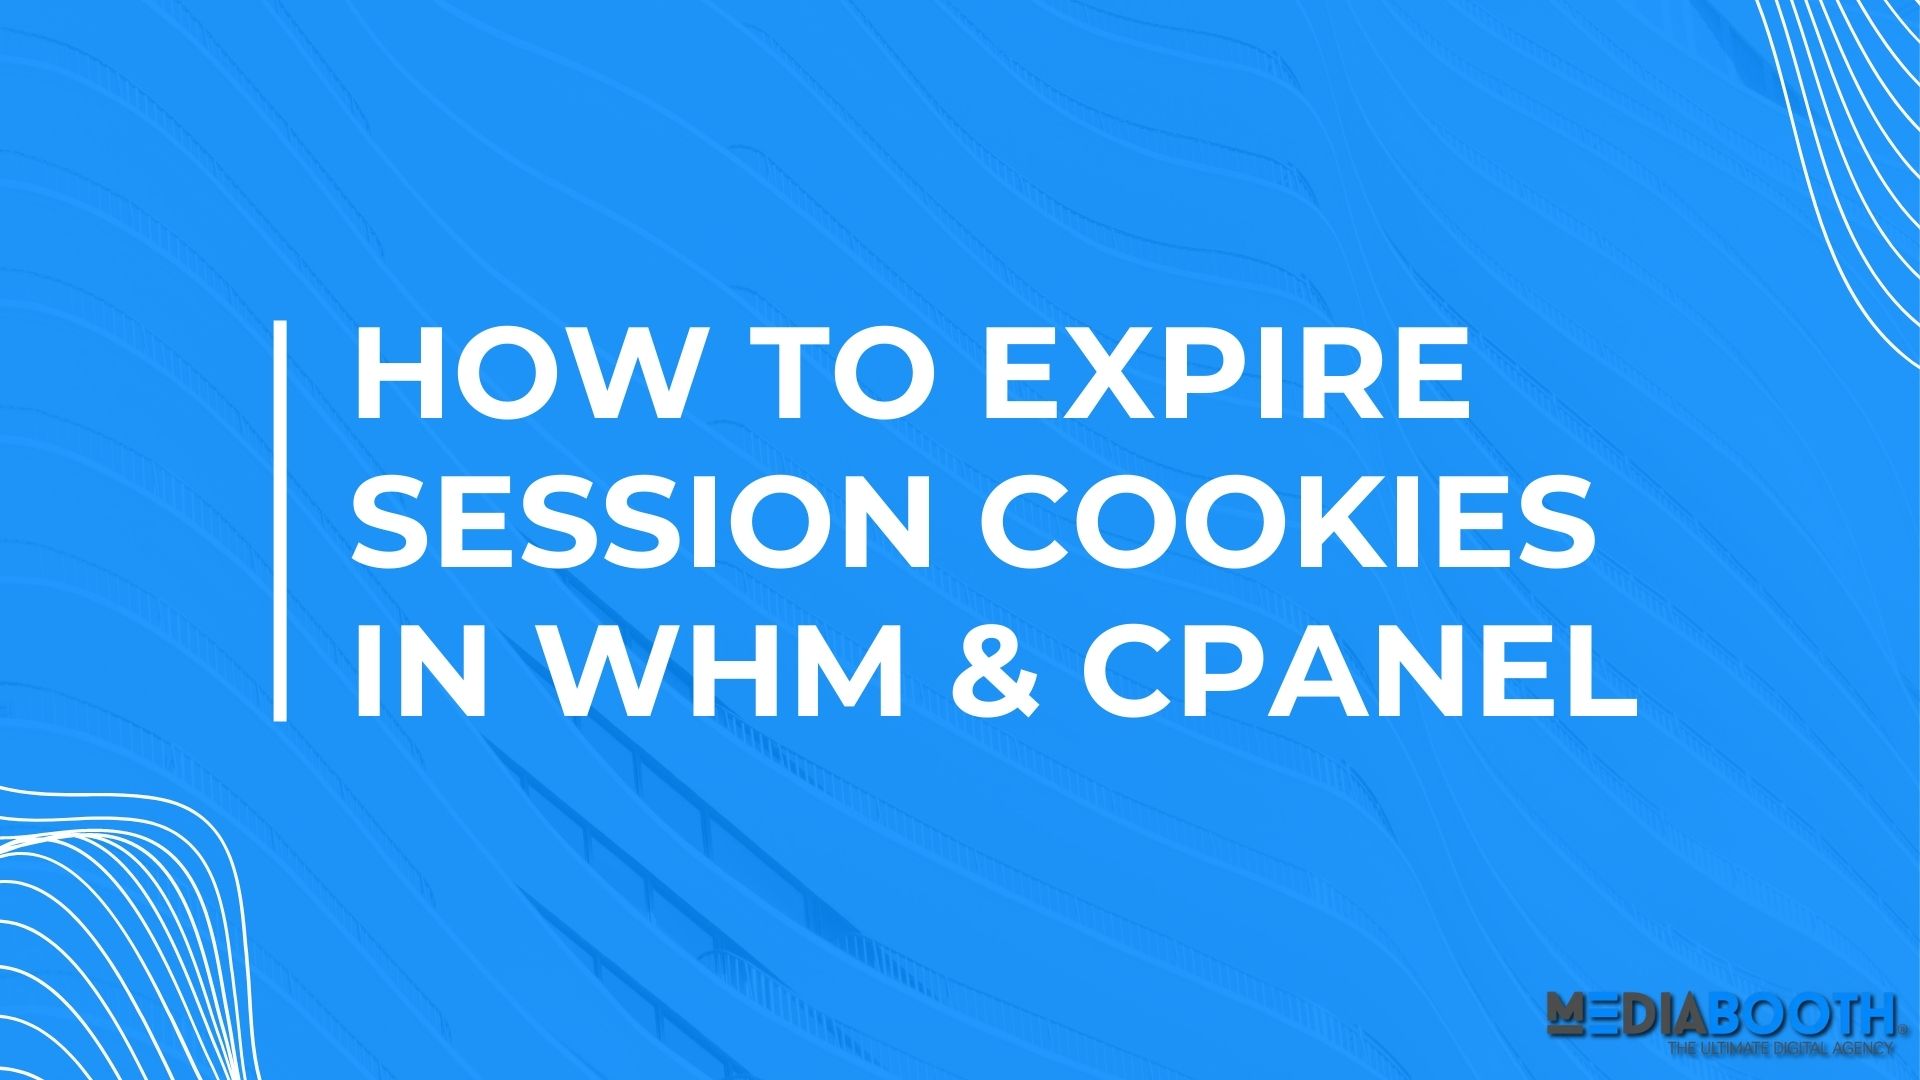 How To Expire Session Cookies in WHM & cPanel